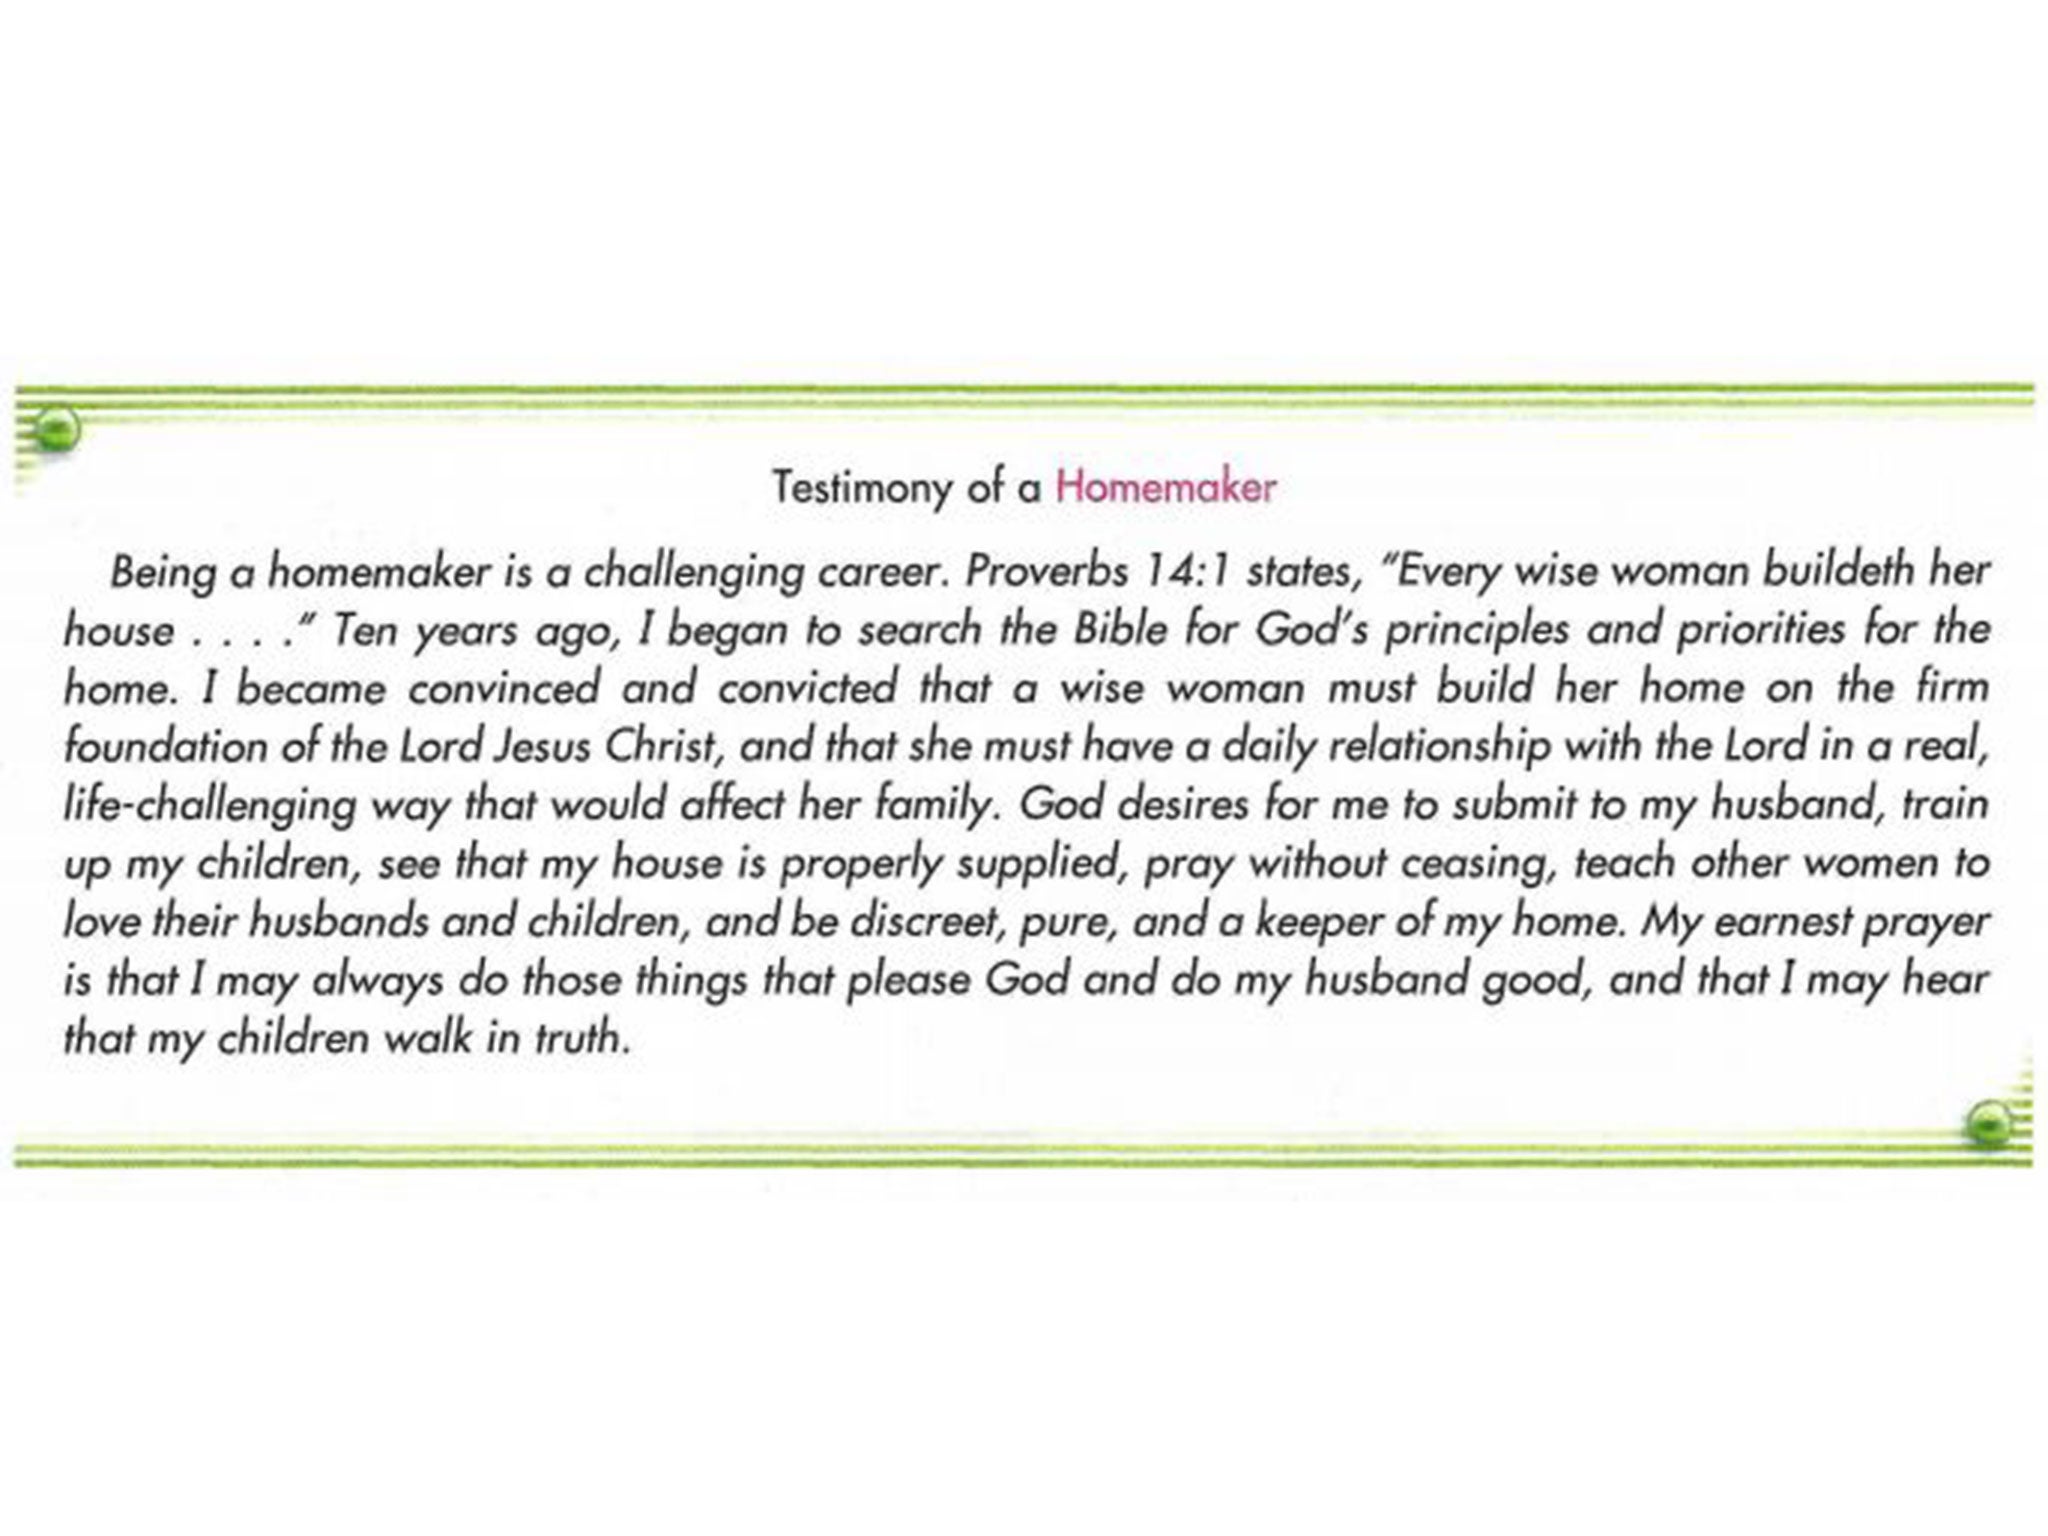 (A passage from an Accelerated Christian Education textbook about the role of a 'homemaker'